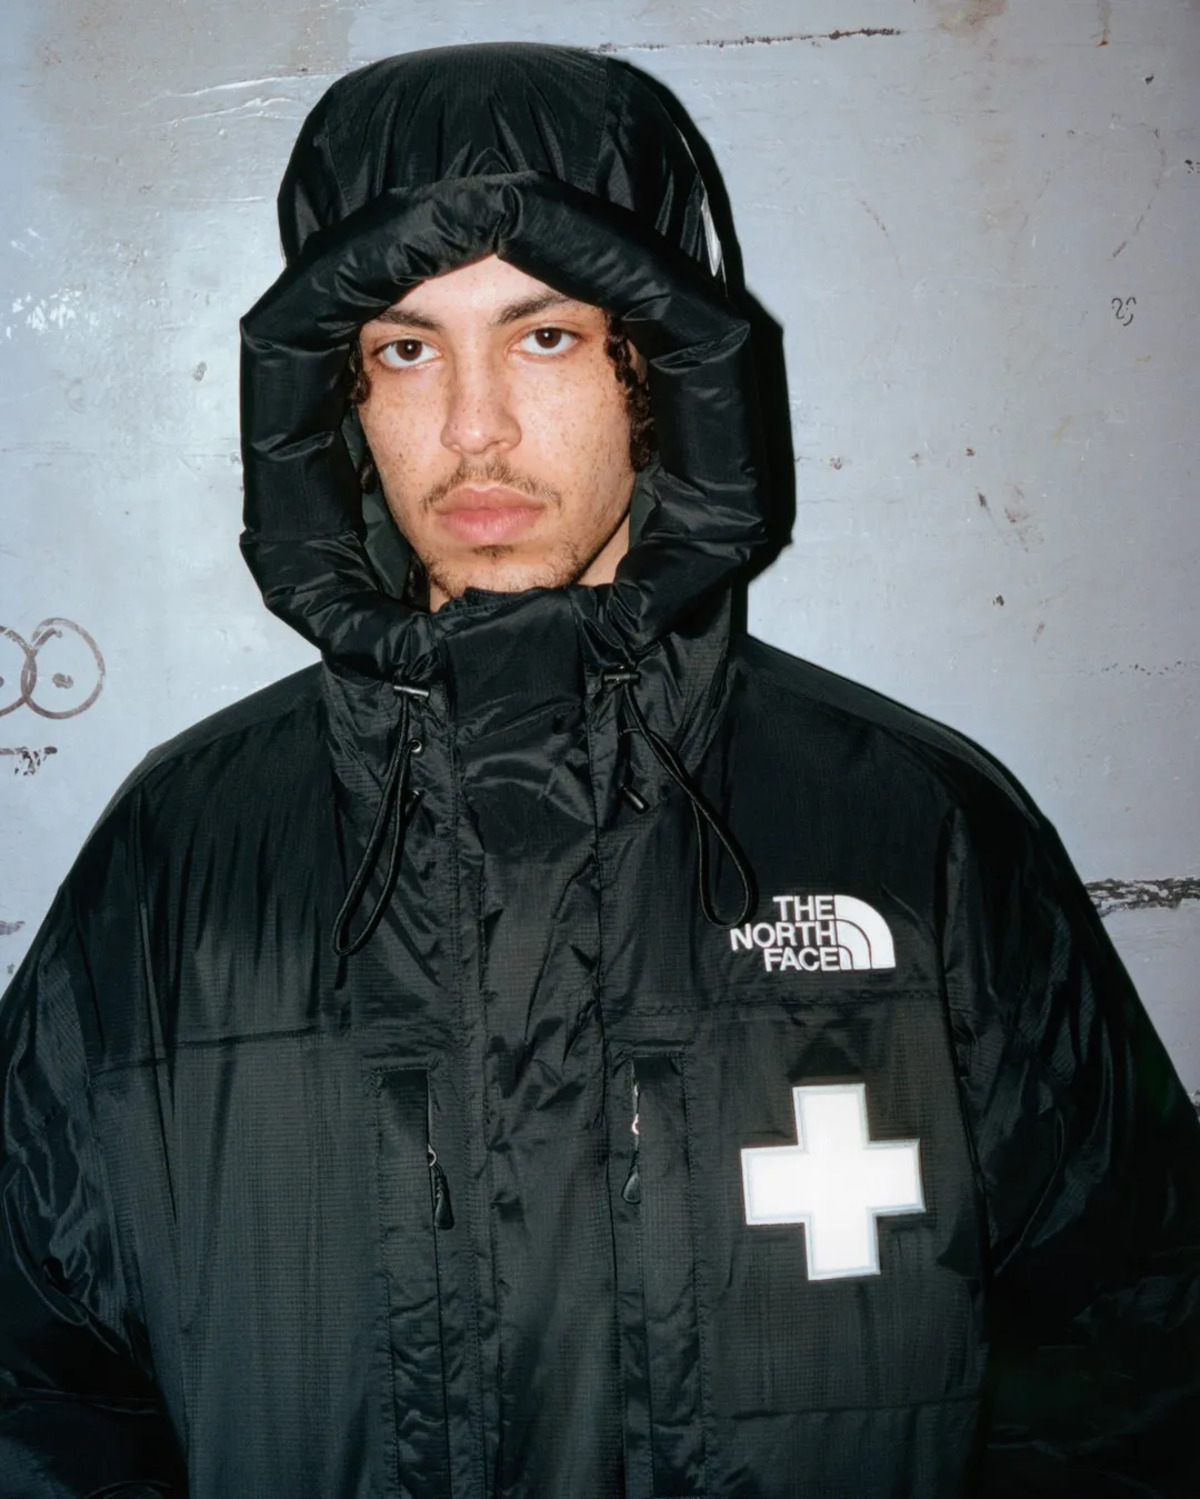 Supreme x The North Face Collection Confirmed for Spring 2022